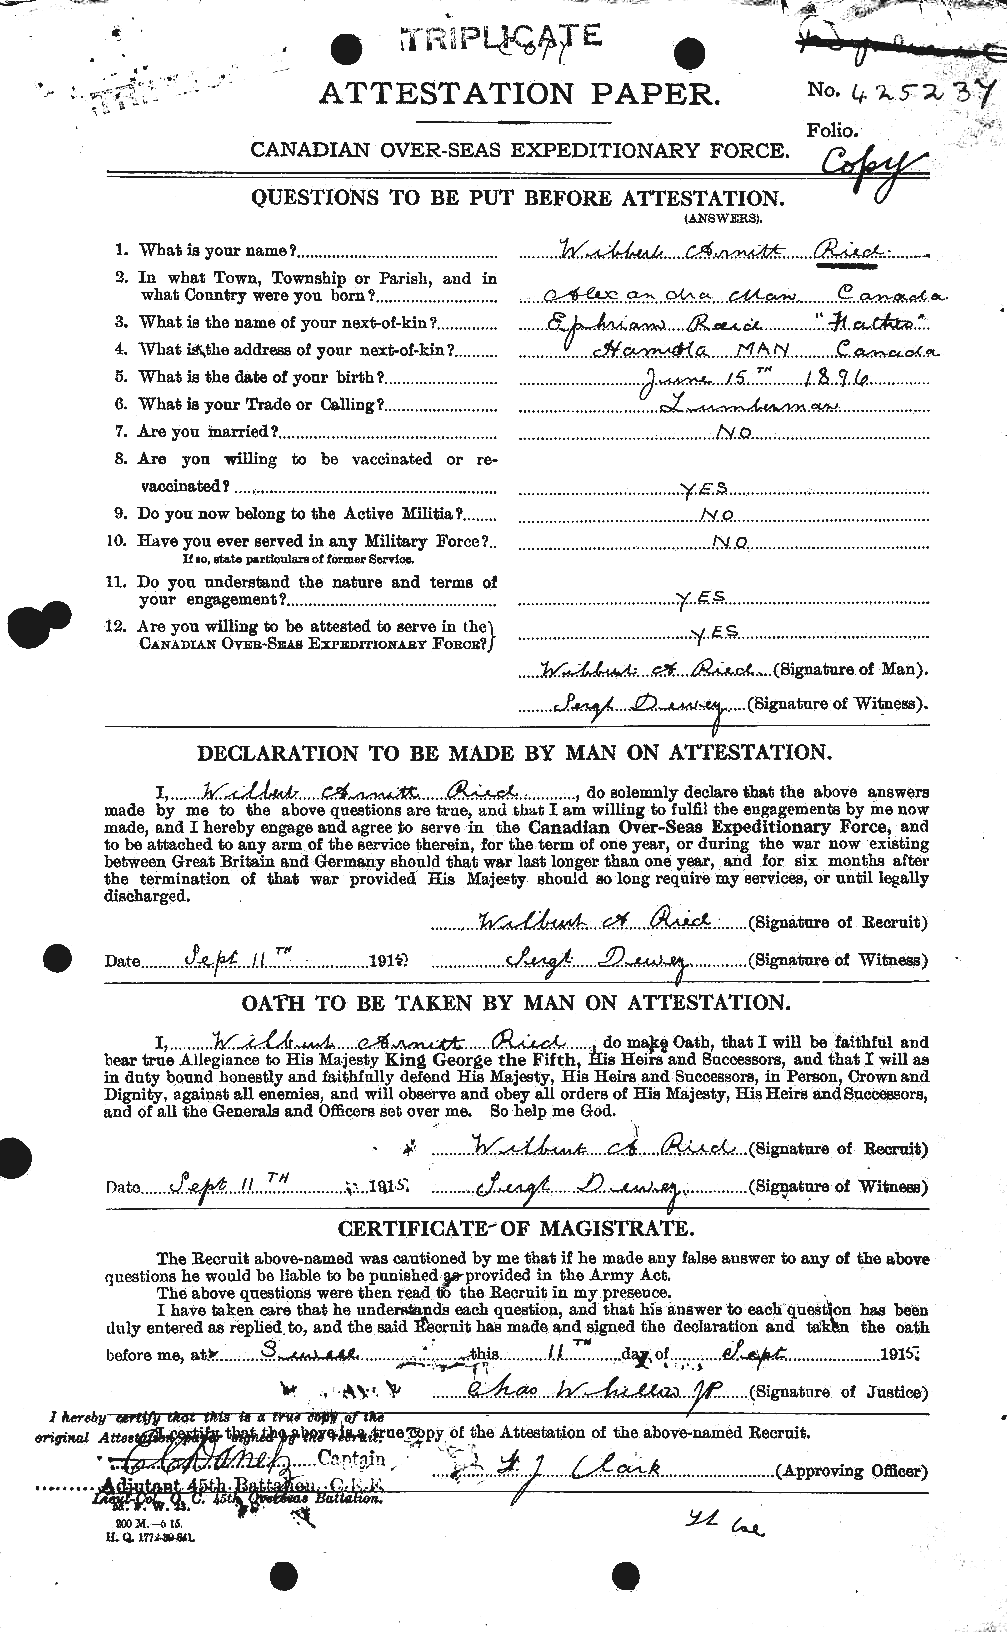 Personnel Records of the First World War - CEF 596899a